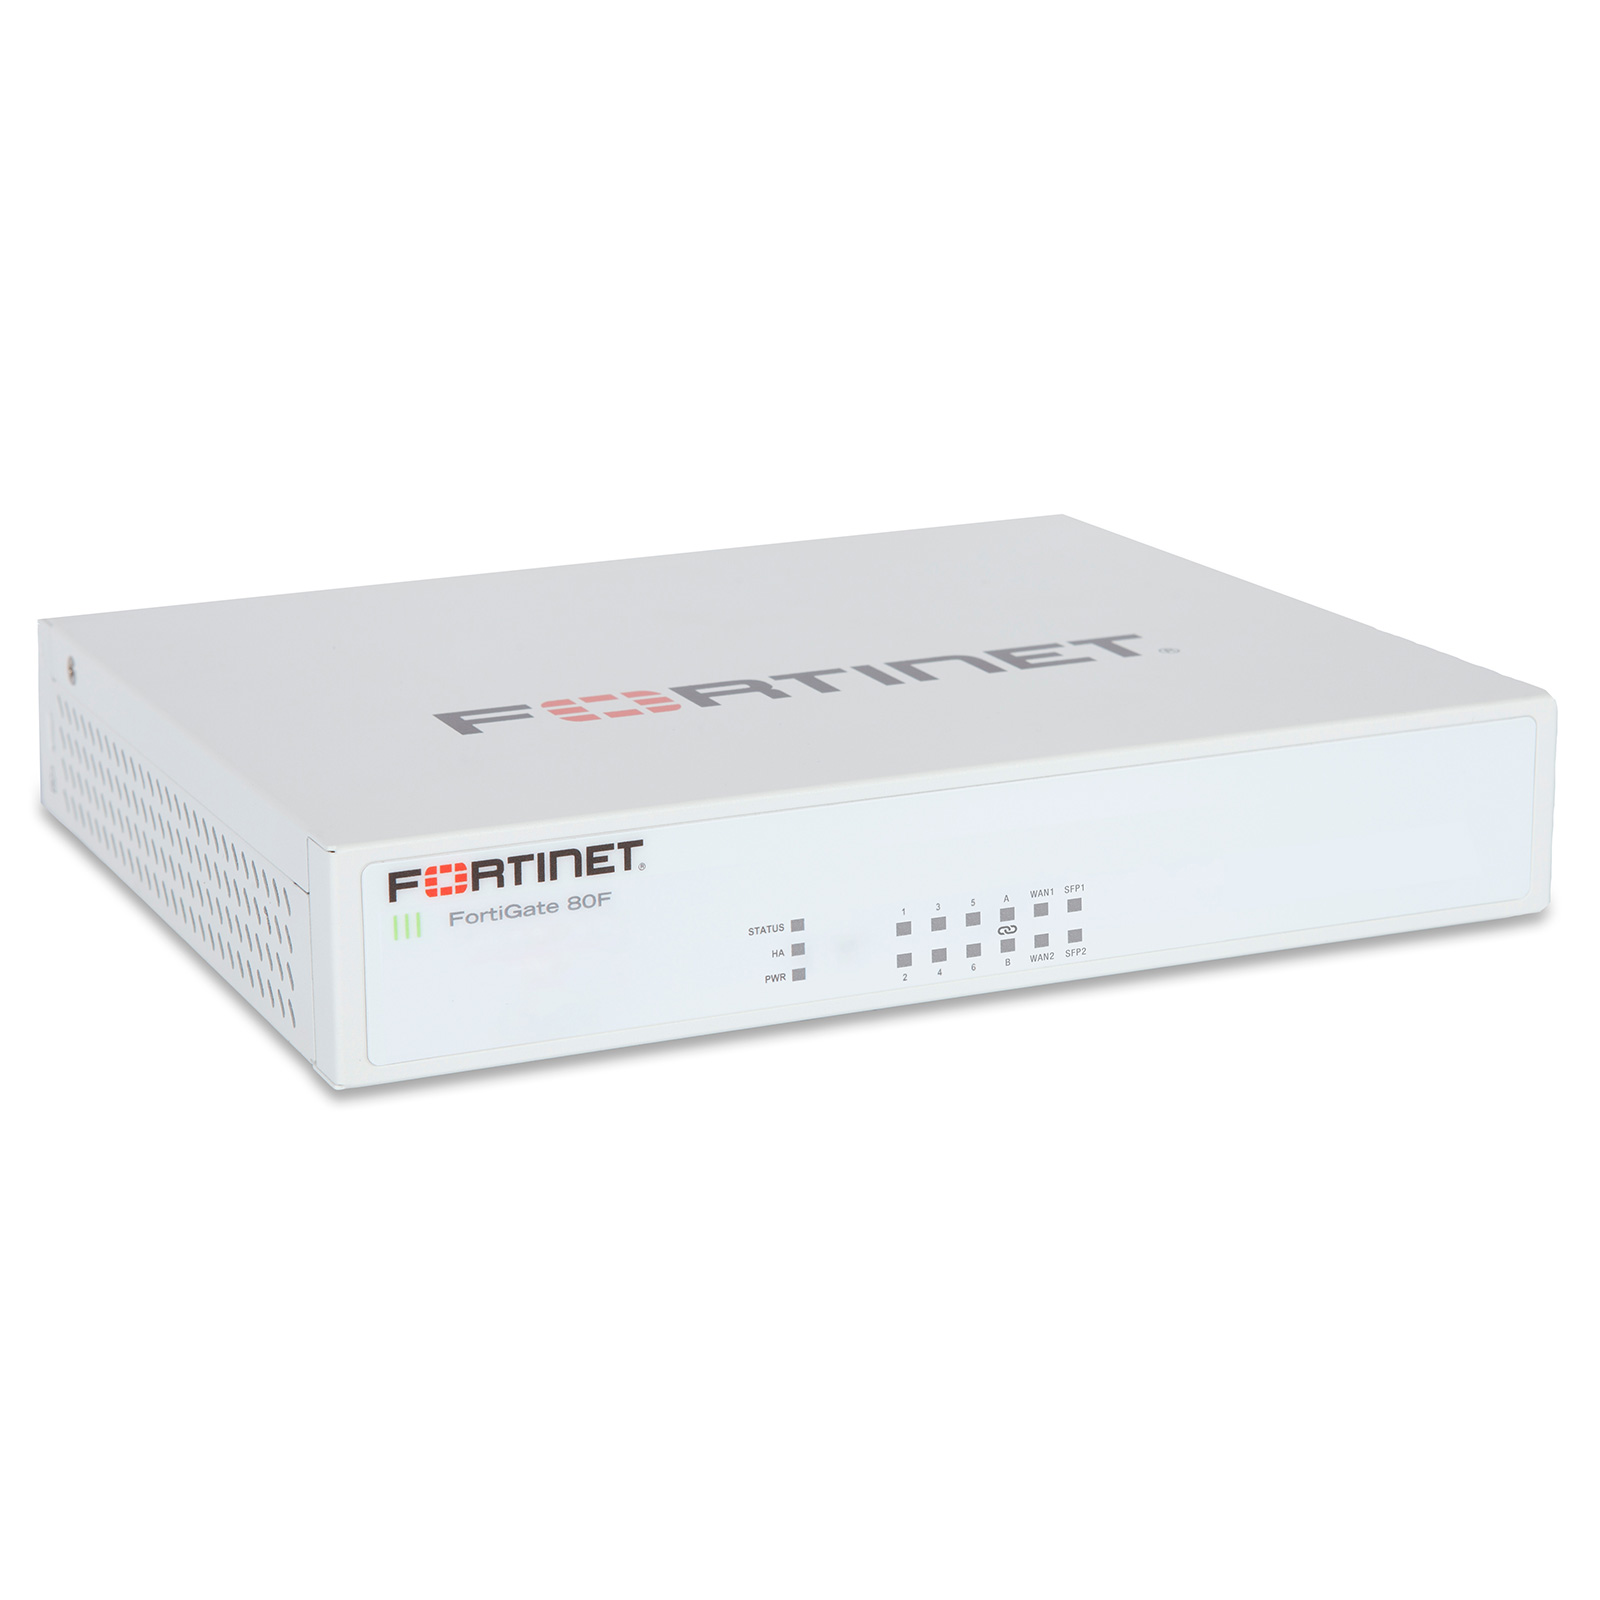 Fortinet FortiGate 80F Firewall with Advanced Threat Protection (ATP)  Bundle, 1 year